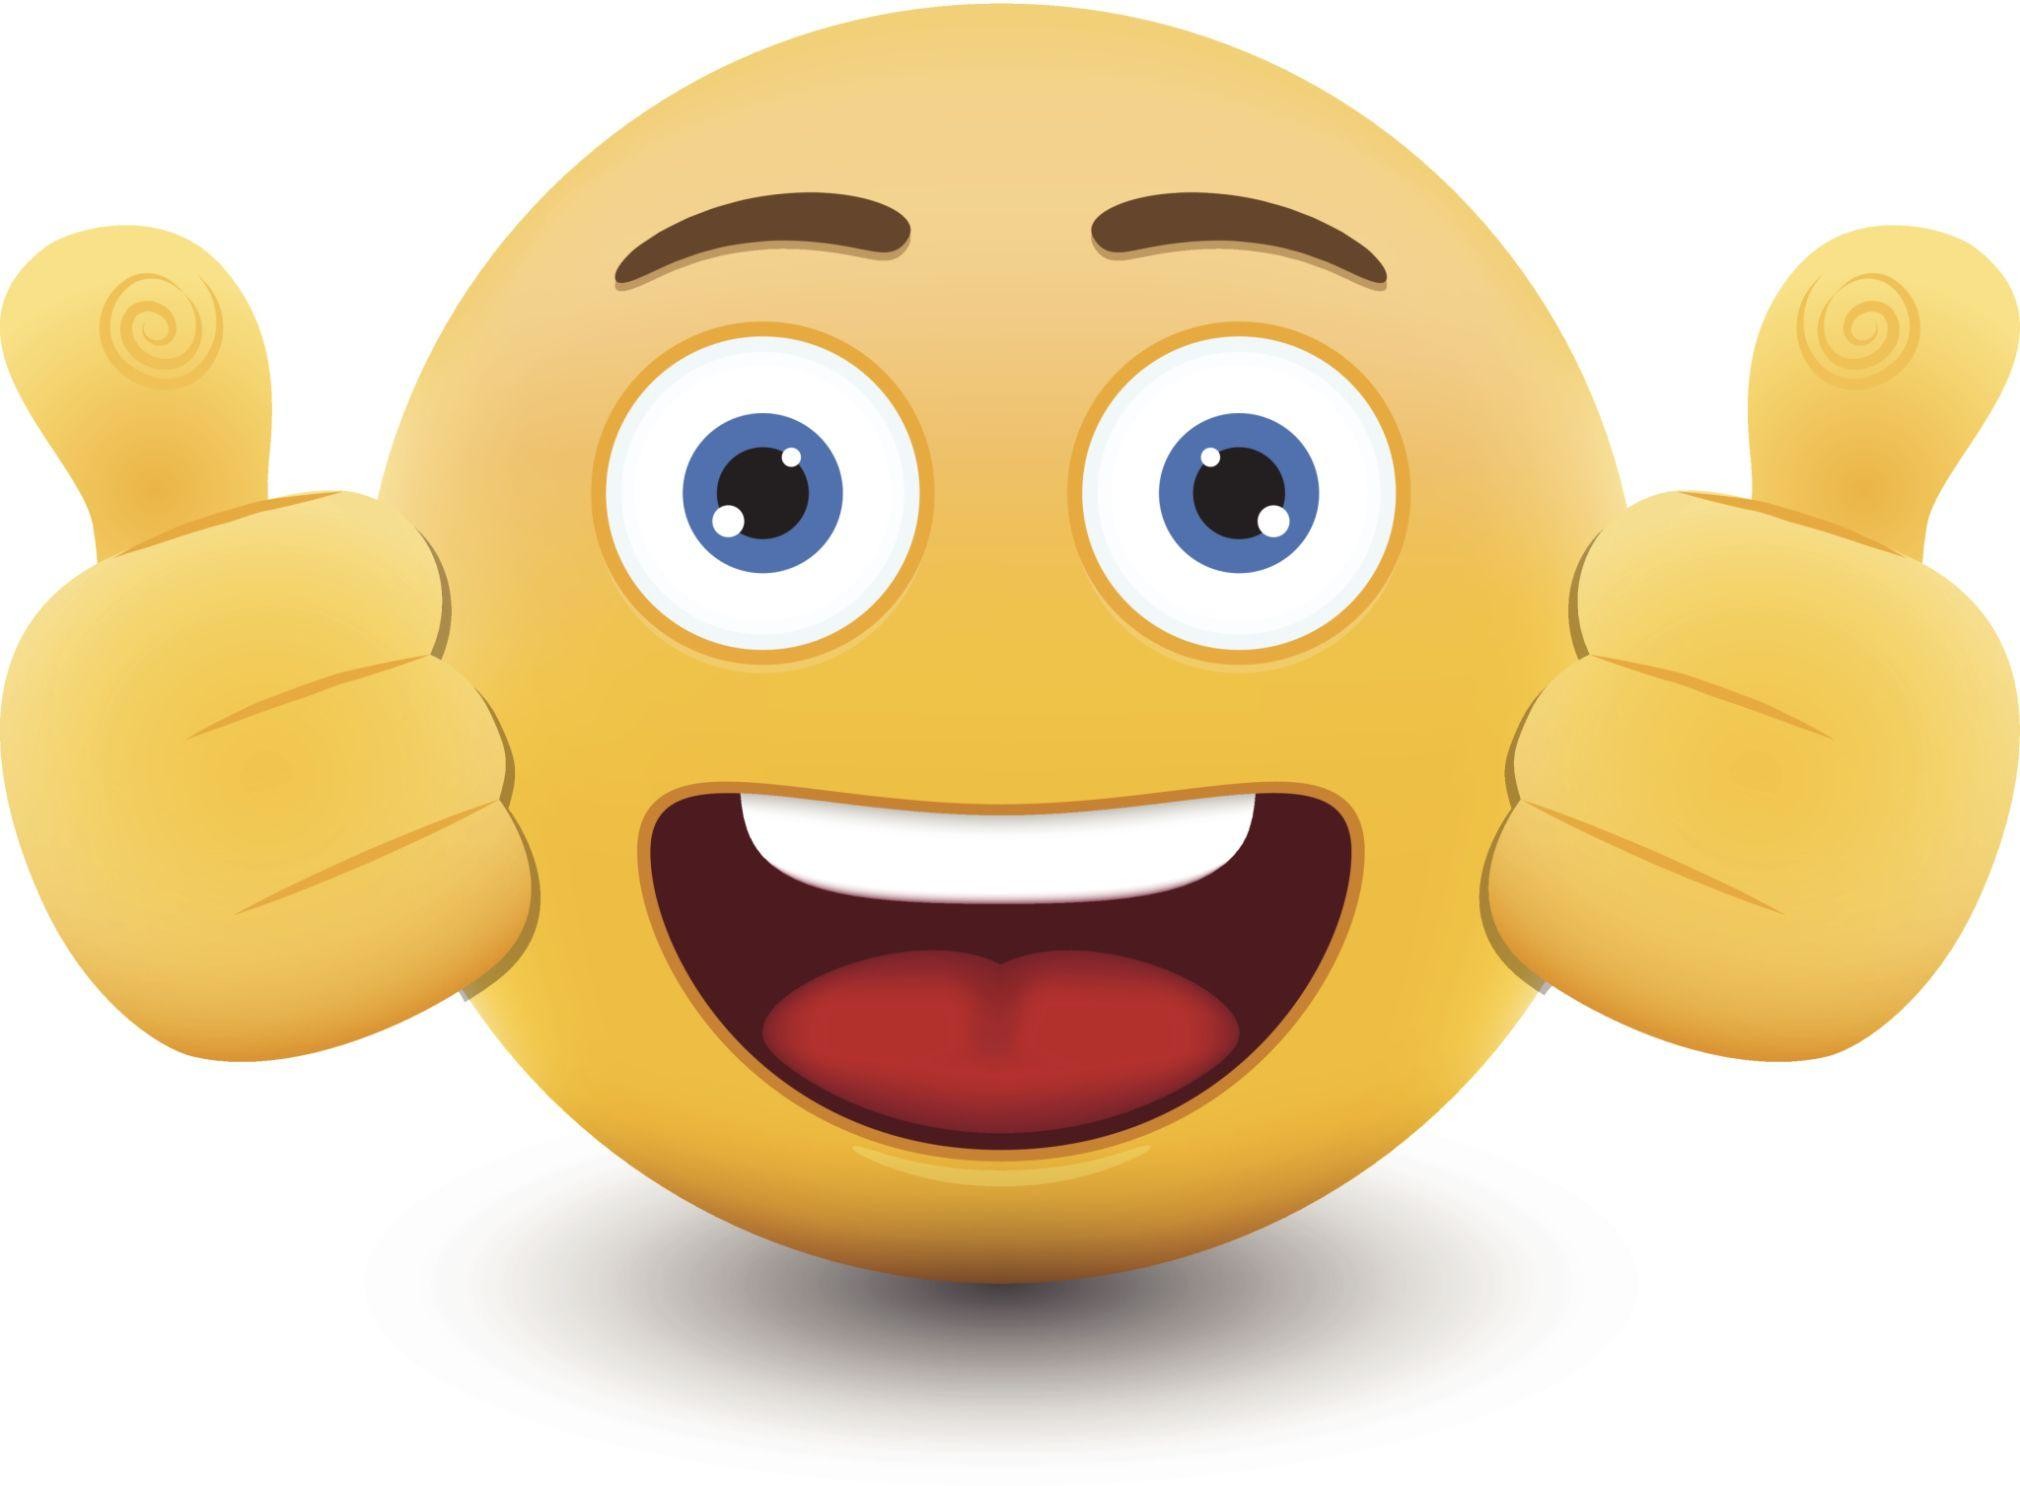 2020x1486 Surprised Face Emoji Wallpapers Widescreen : Other Wallpaper .